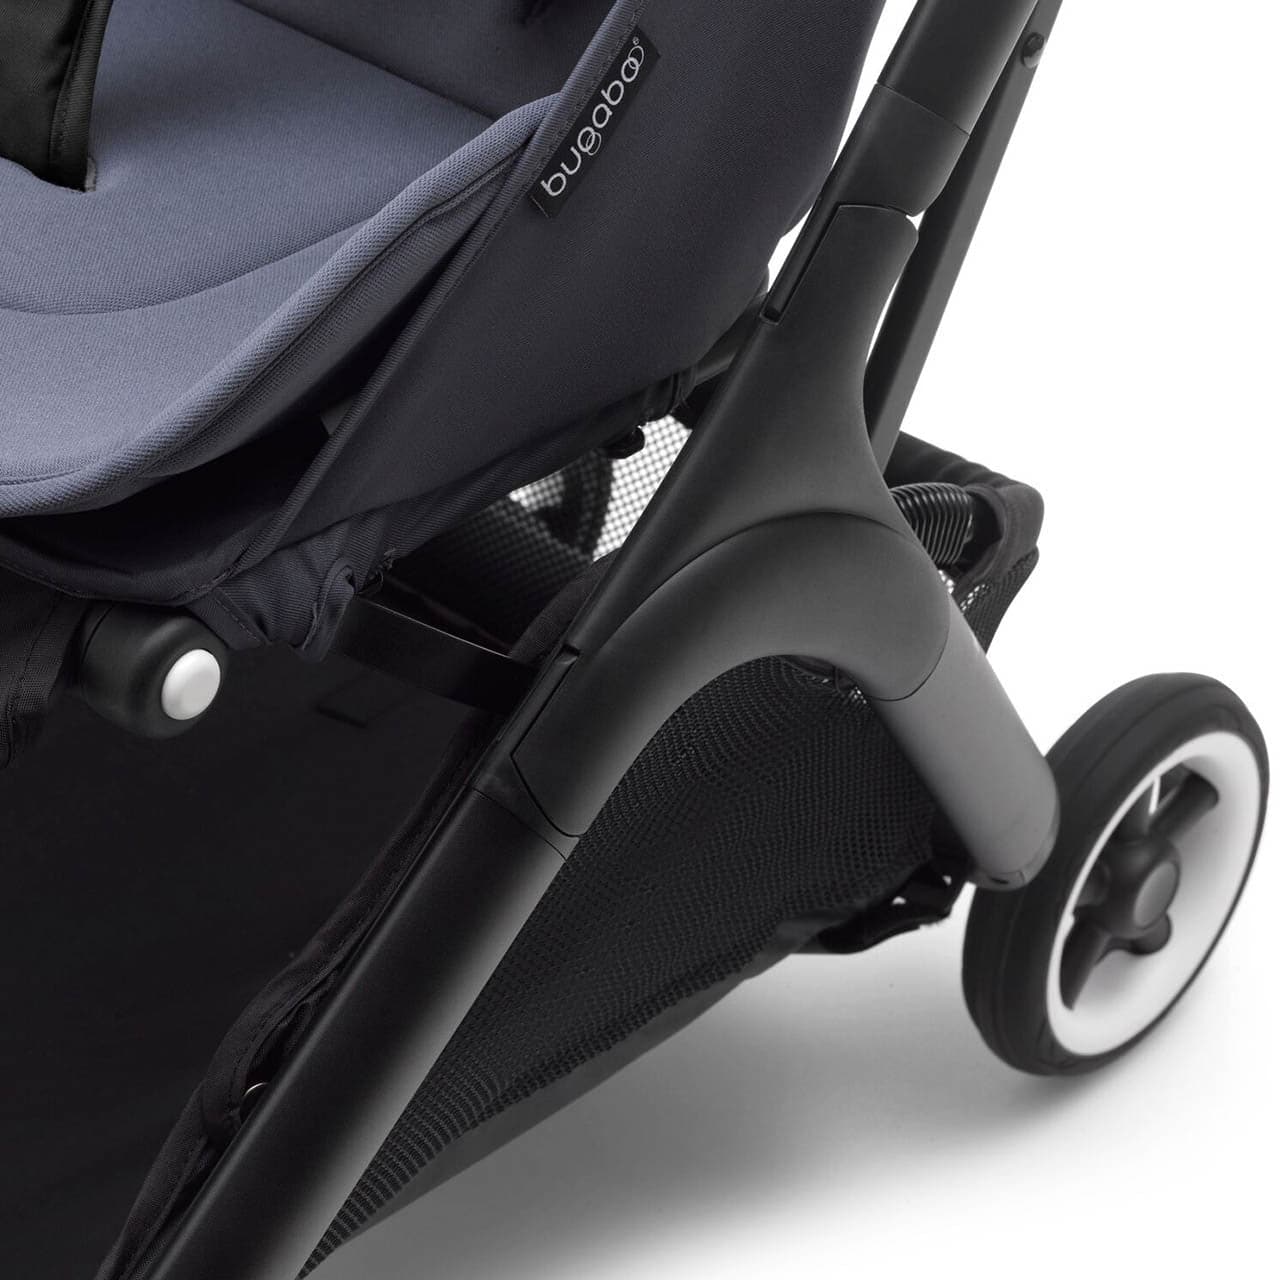 Bugaboo Butterfly Stroller - Stormy Blue -  | For Your Little One